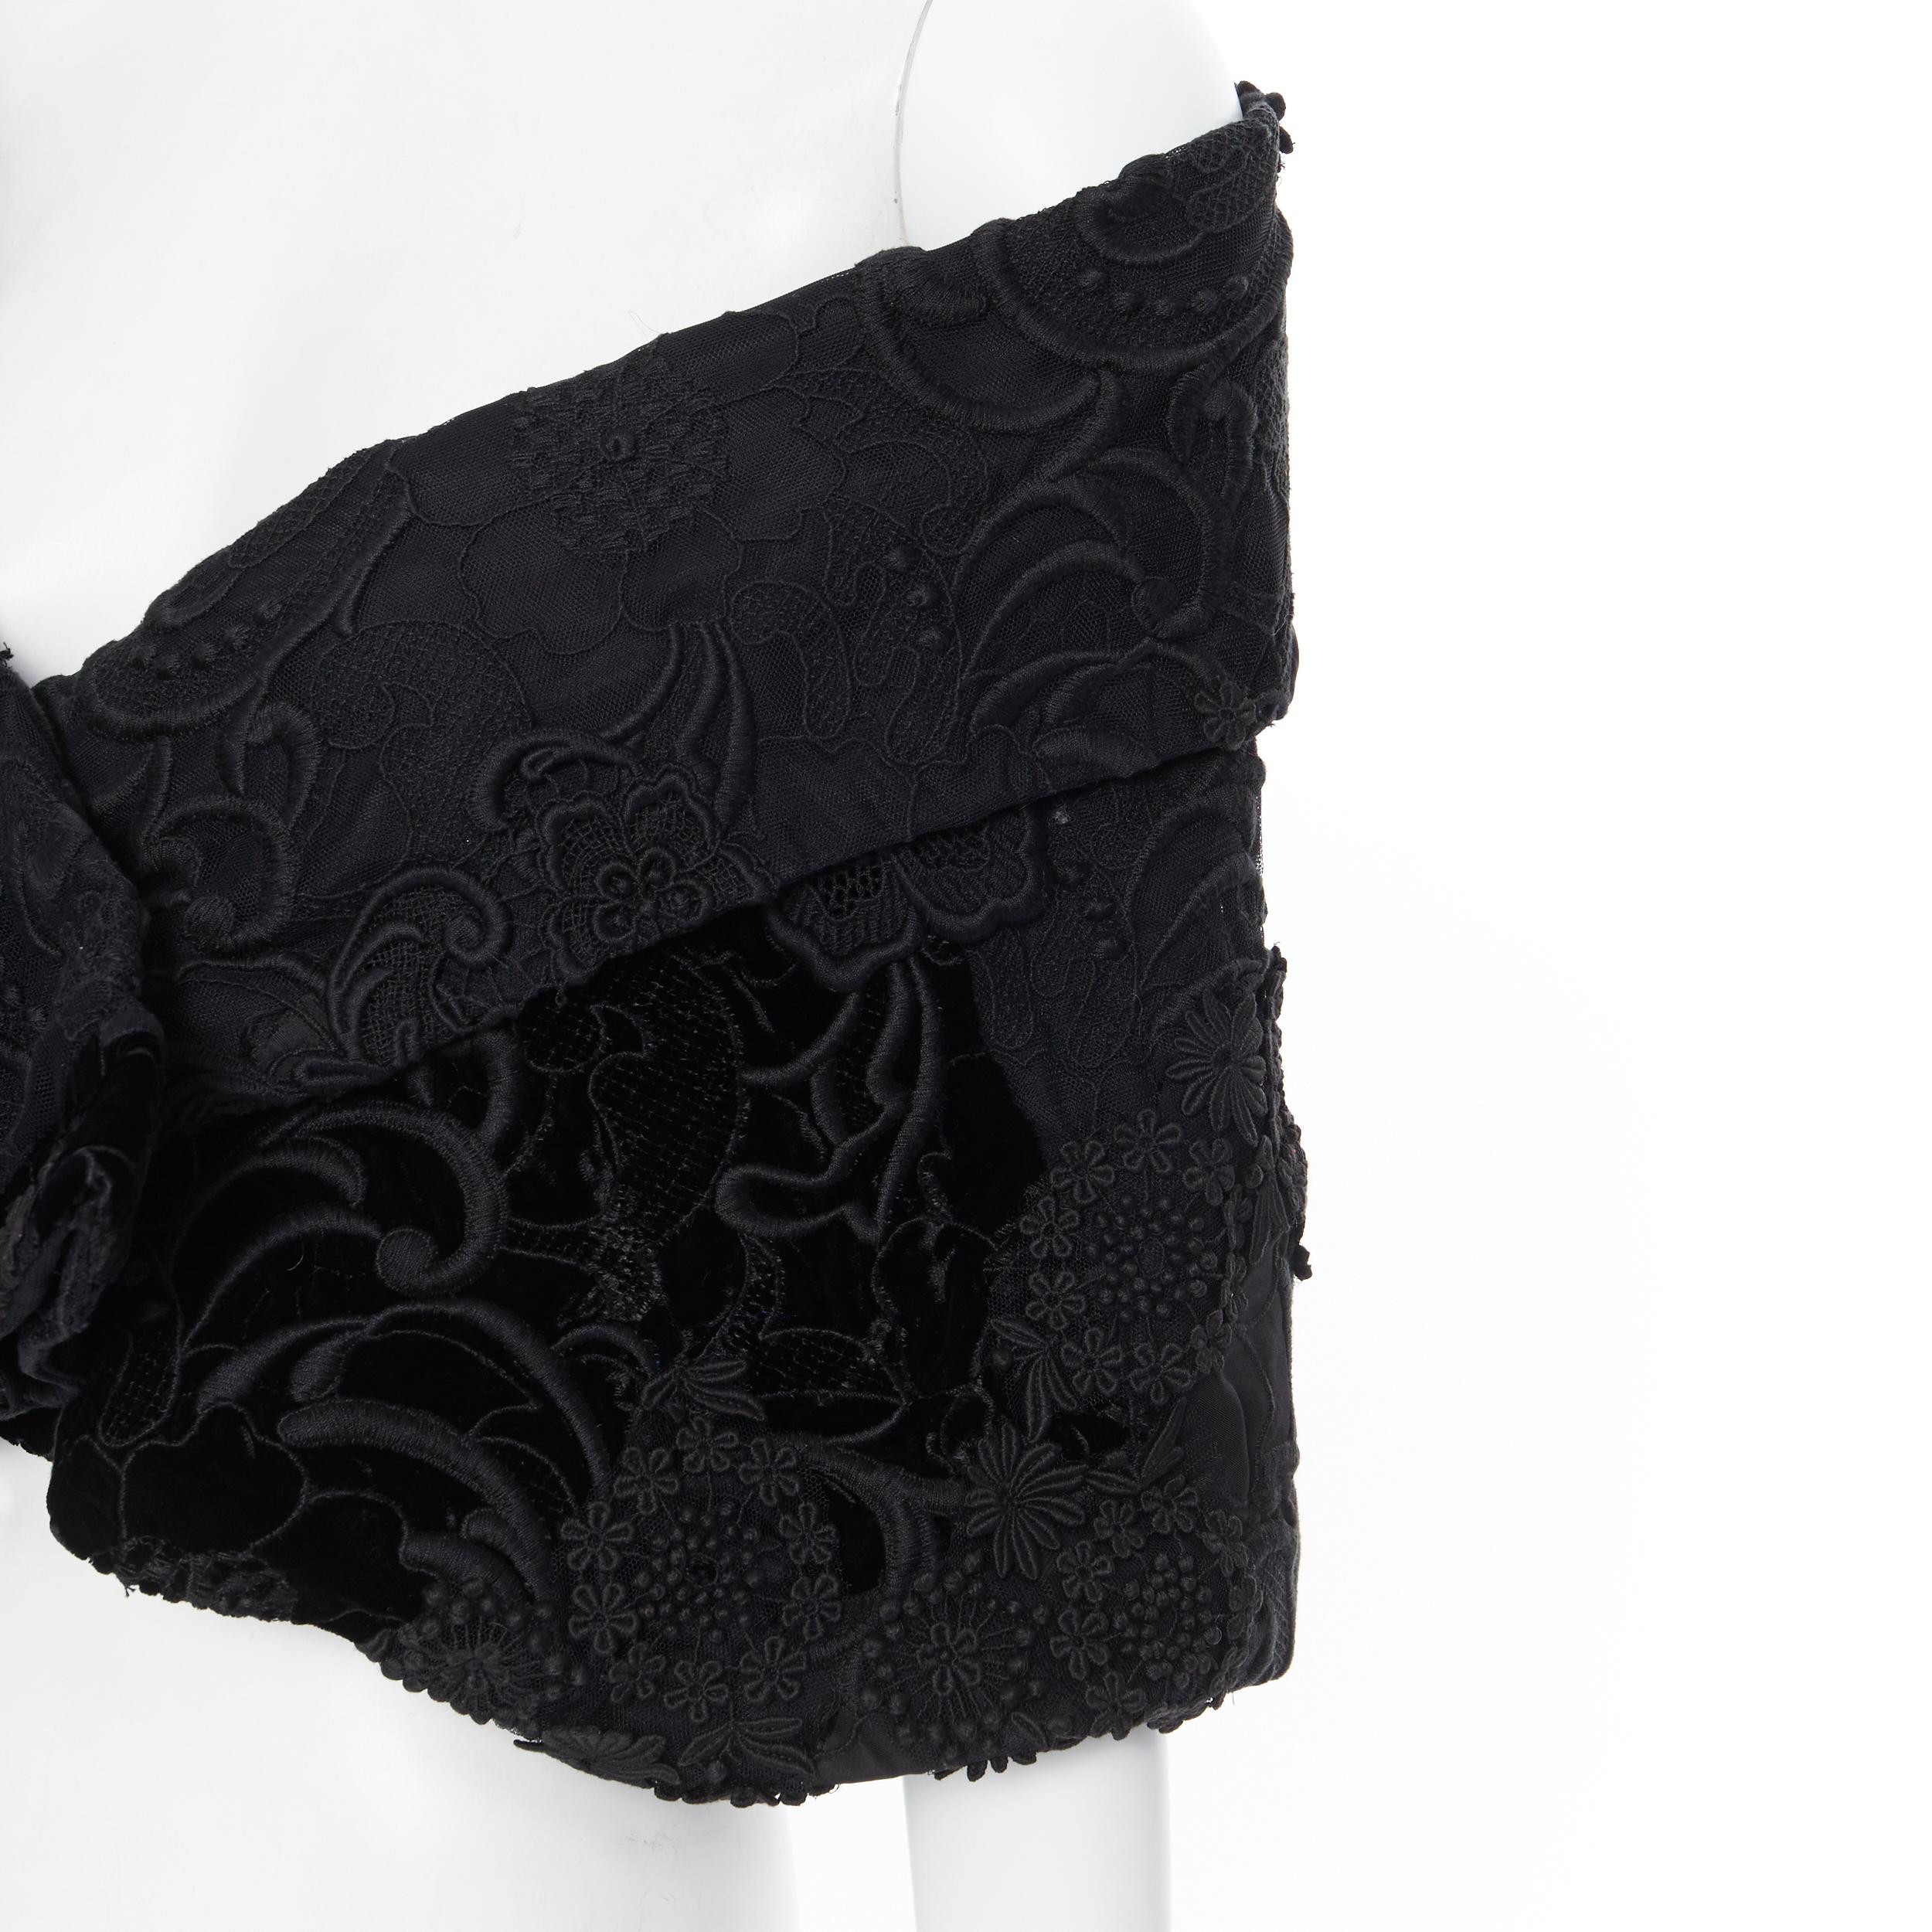 new PRADA Special Edition black 3D floral embroidered off shoulder shawl cape
Brand: Prada
Designer: Miuccia Prada
Collection: Special Edition Label
Model Name / Style: Cape shawl 
Material: Composition label removed
Color: Black
Pattern: